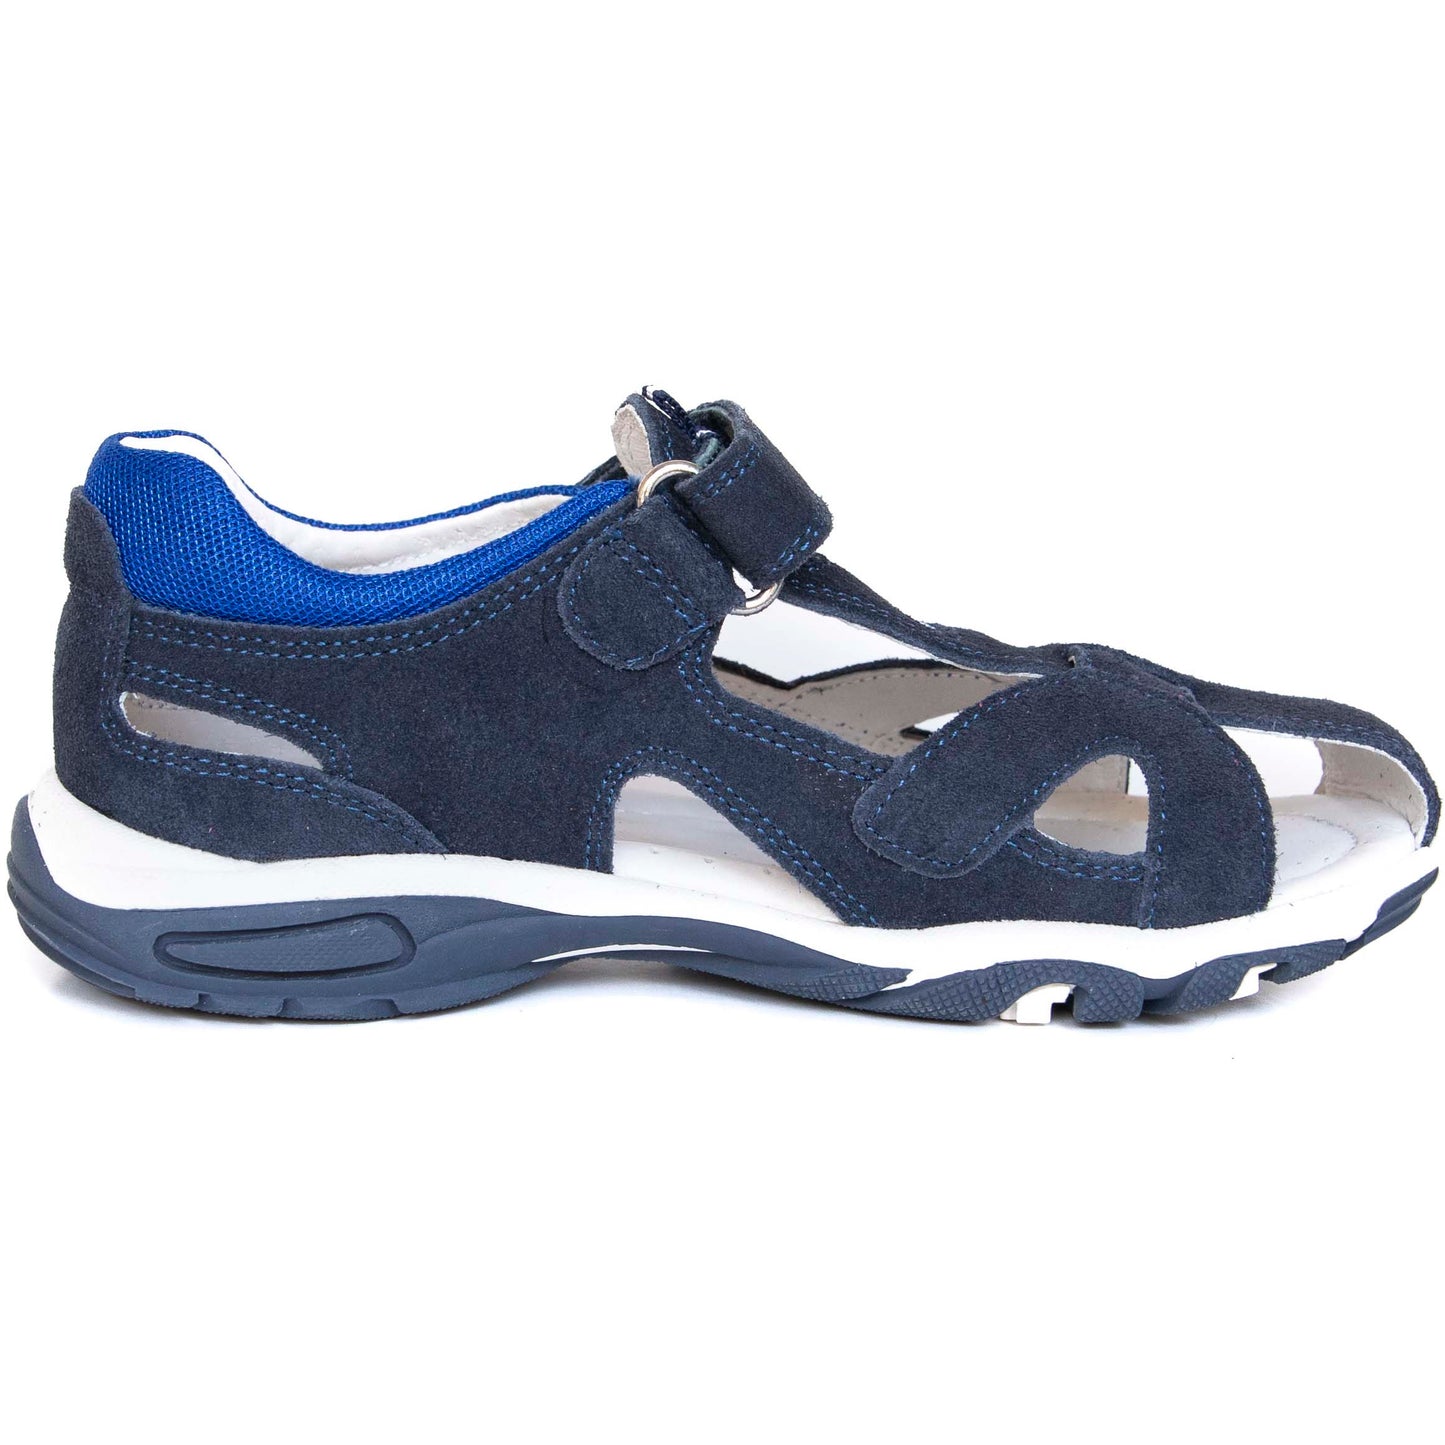 AKRON older boys arch support sandals